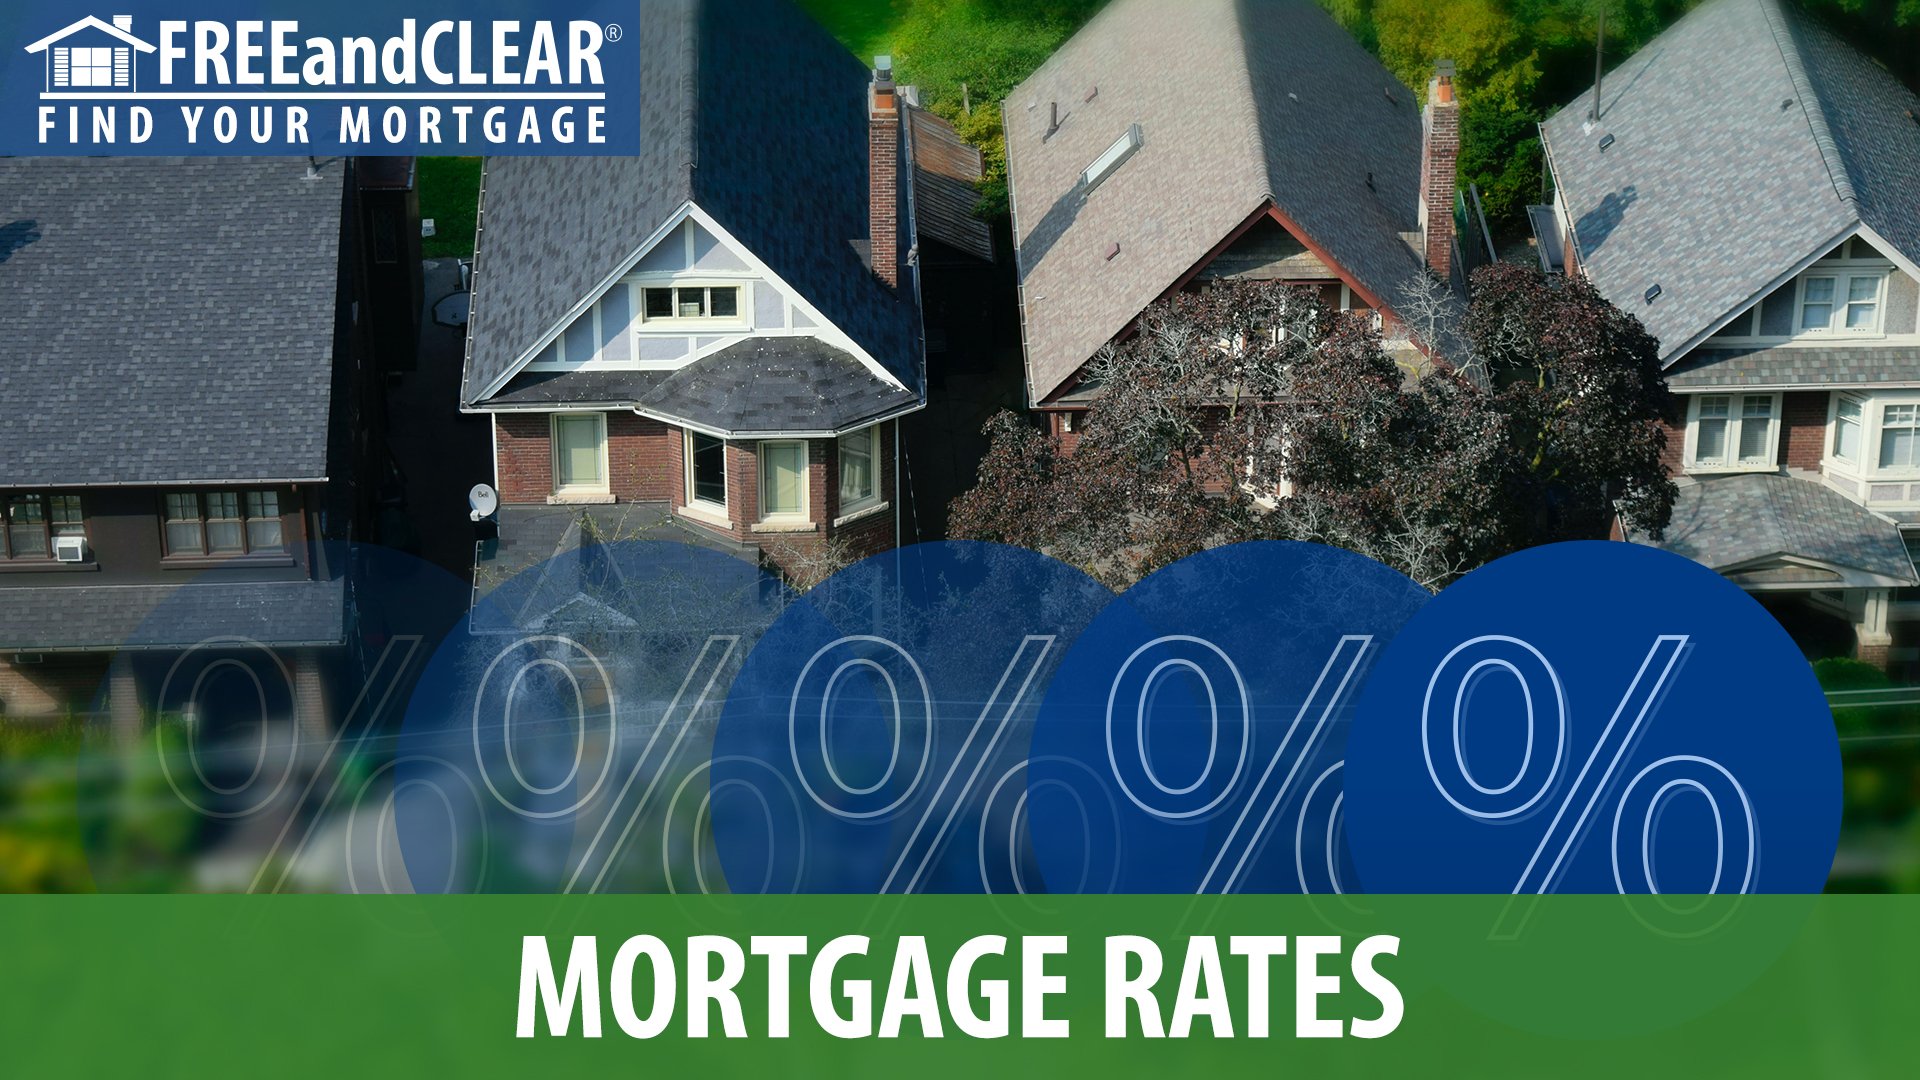 Compare Current Houston, TX Mortgage Rates | FREEandCLEAR